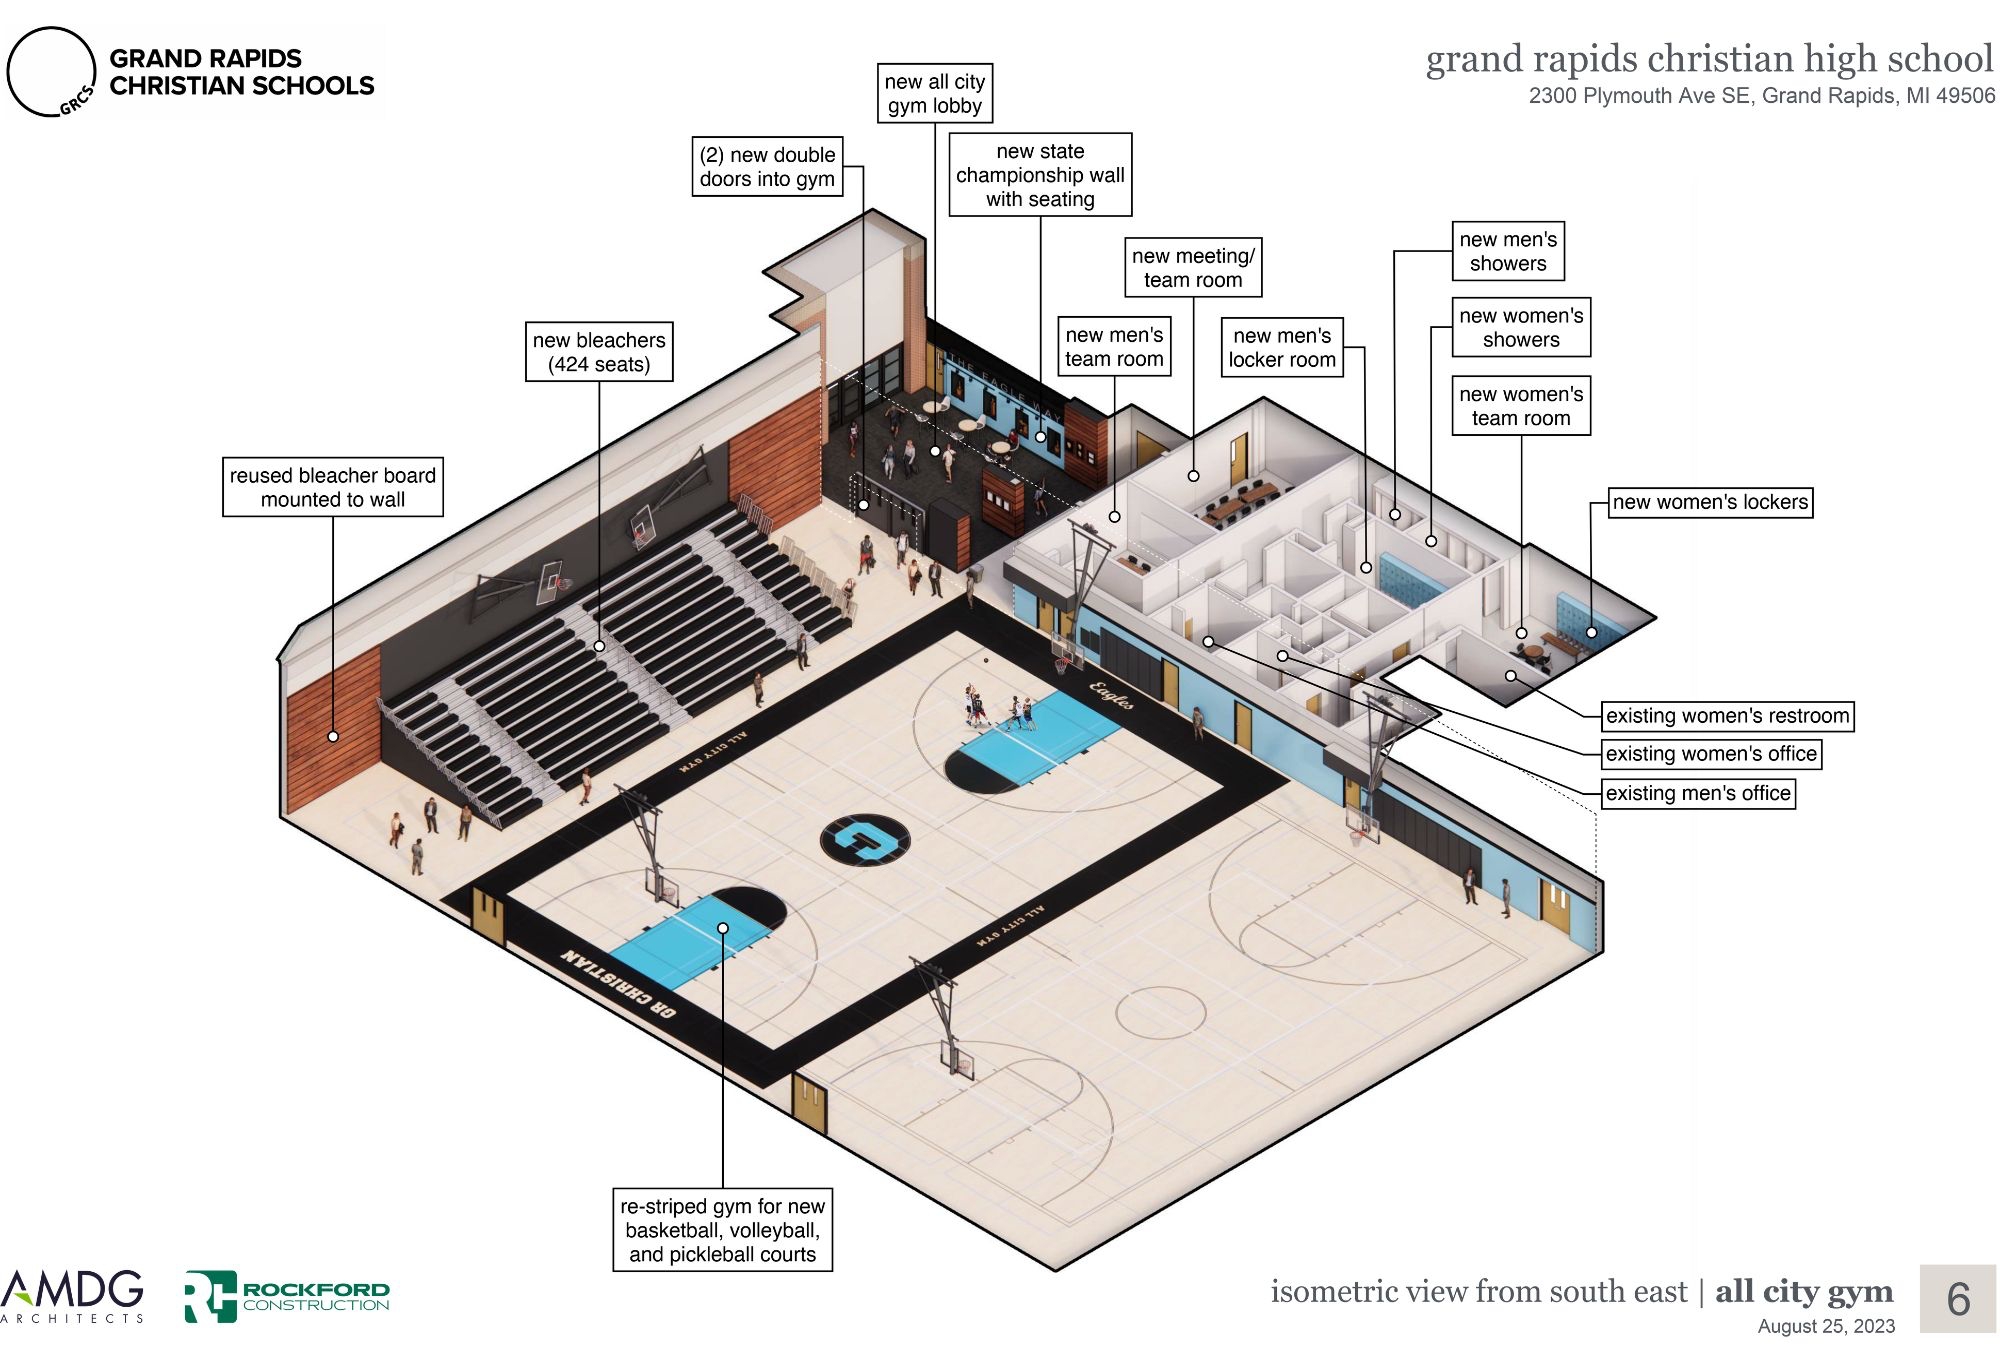 New plans for the Grand Rapids Christian All City Gym renovation project